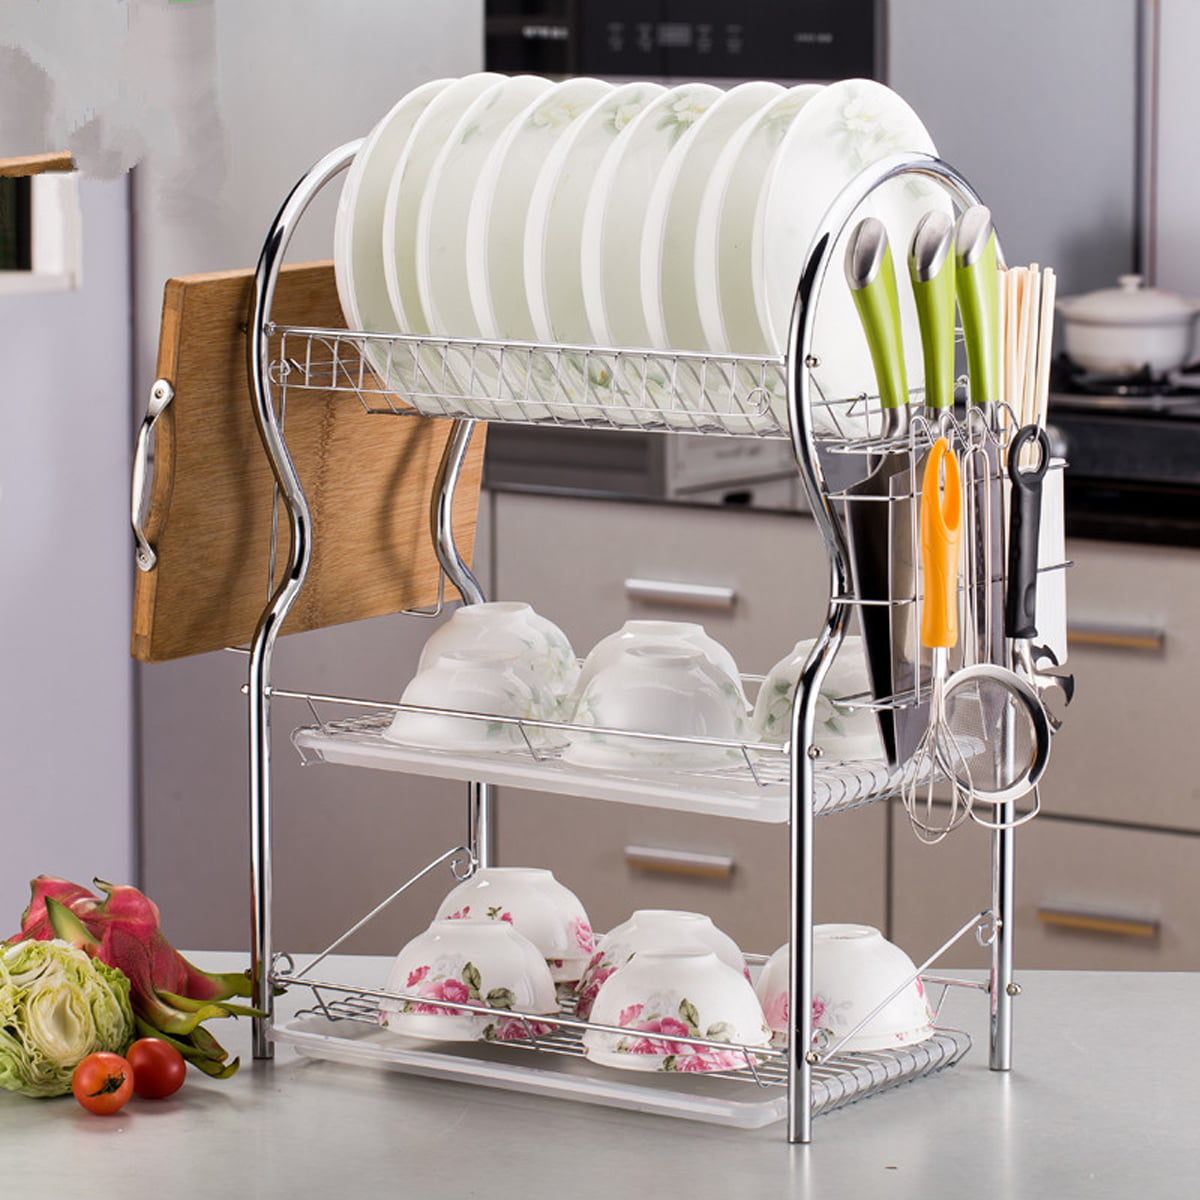 3 Tiers Kitchen Dish Cup Drying Rack Drainer Dryer Tray Cutlery Holder Organizer 